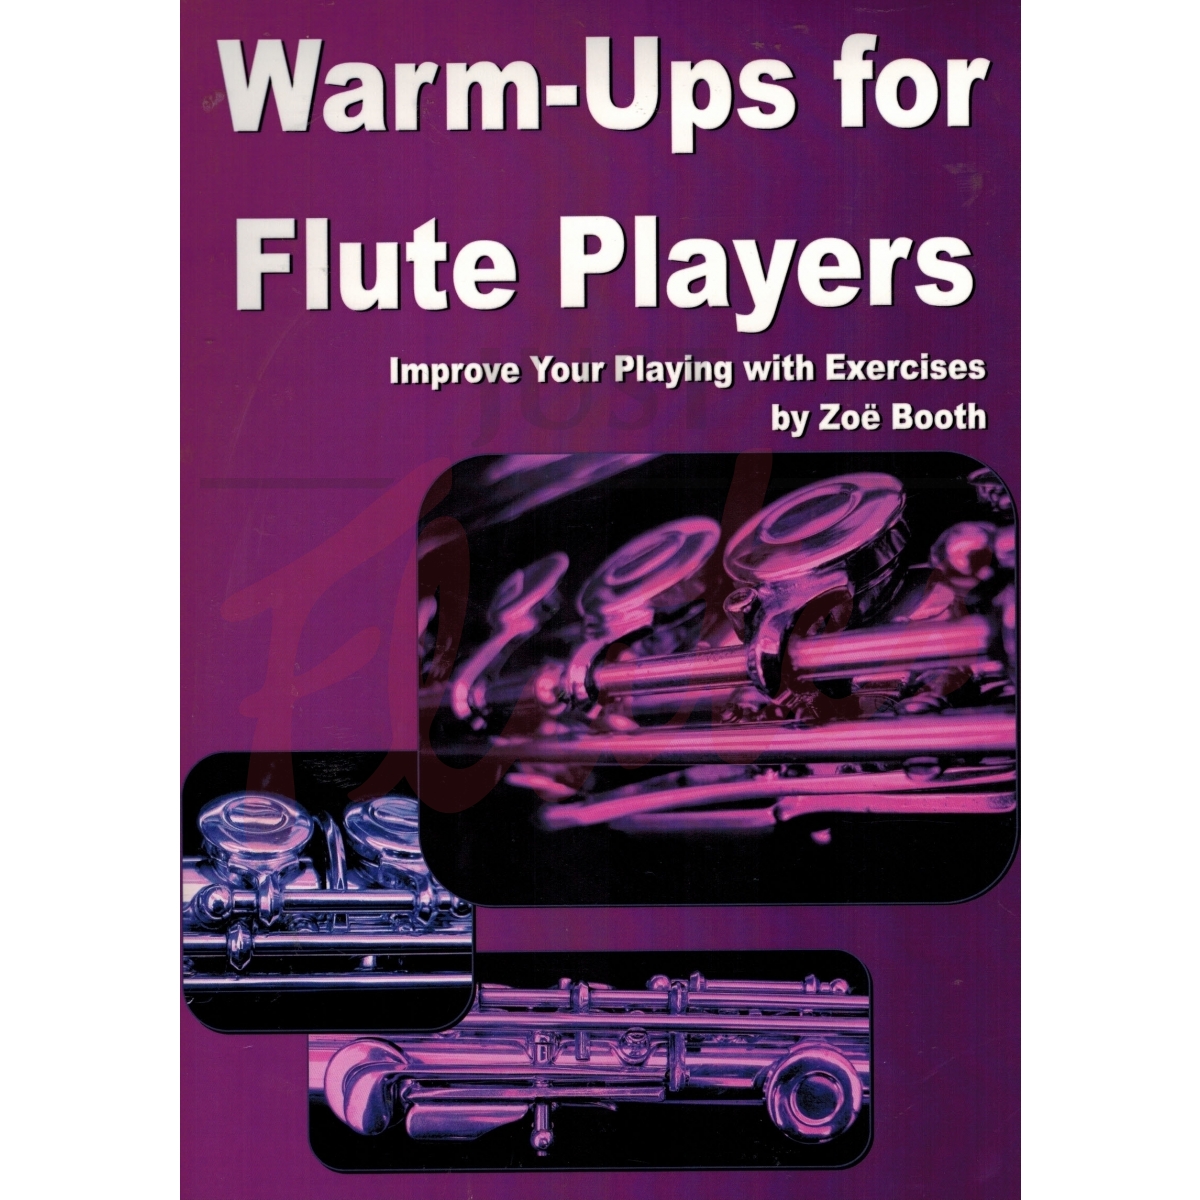 Warm-Ups for Flute Players